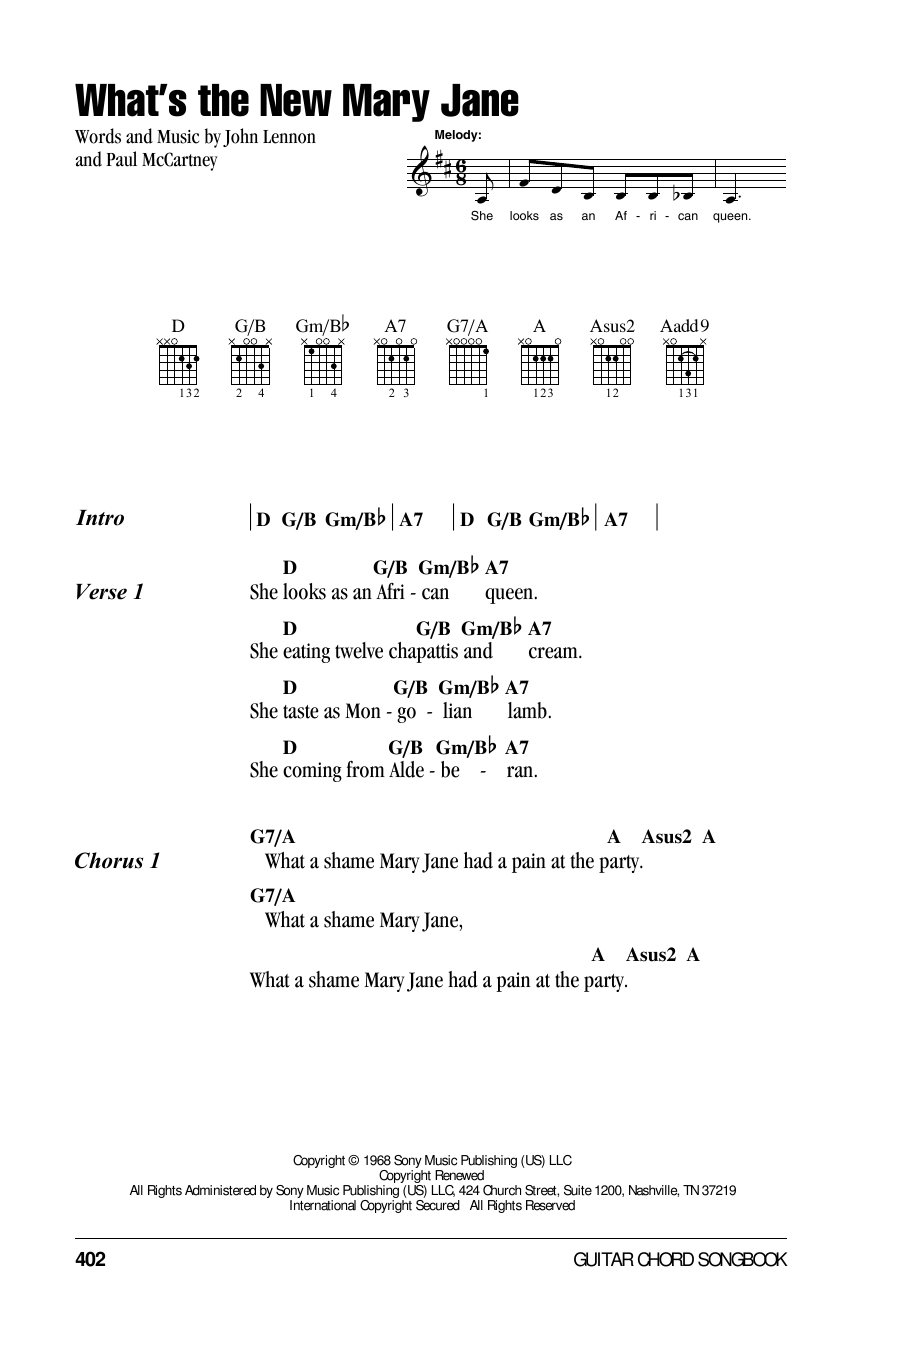 Download The Beatles What's The New Mary Jane Sheet Music